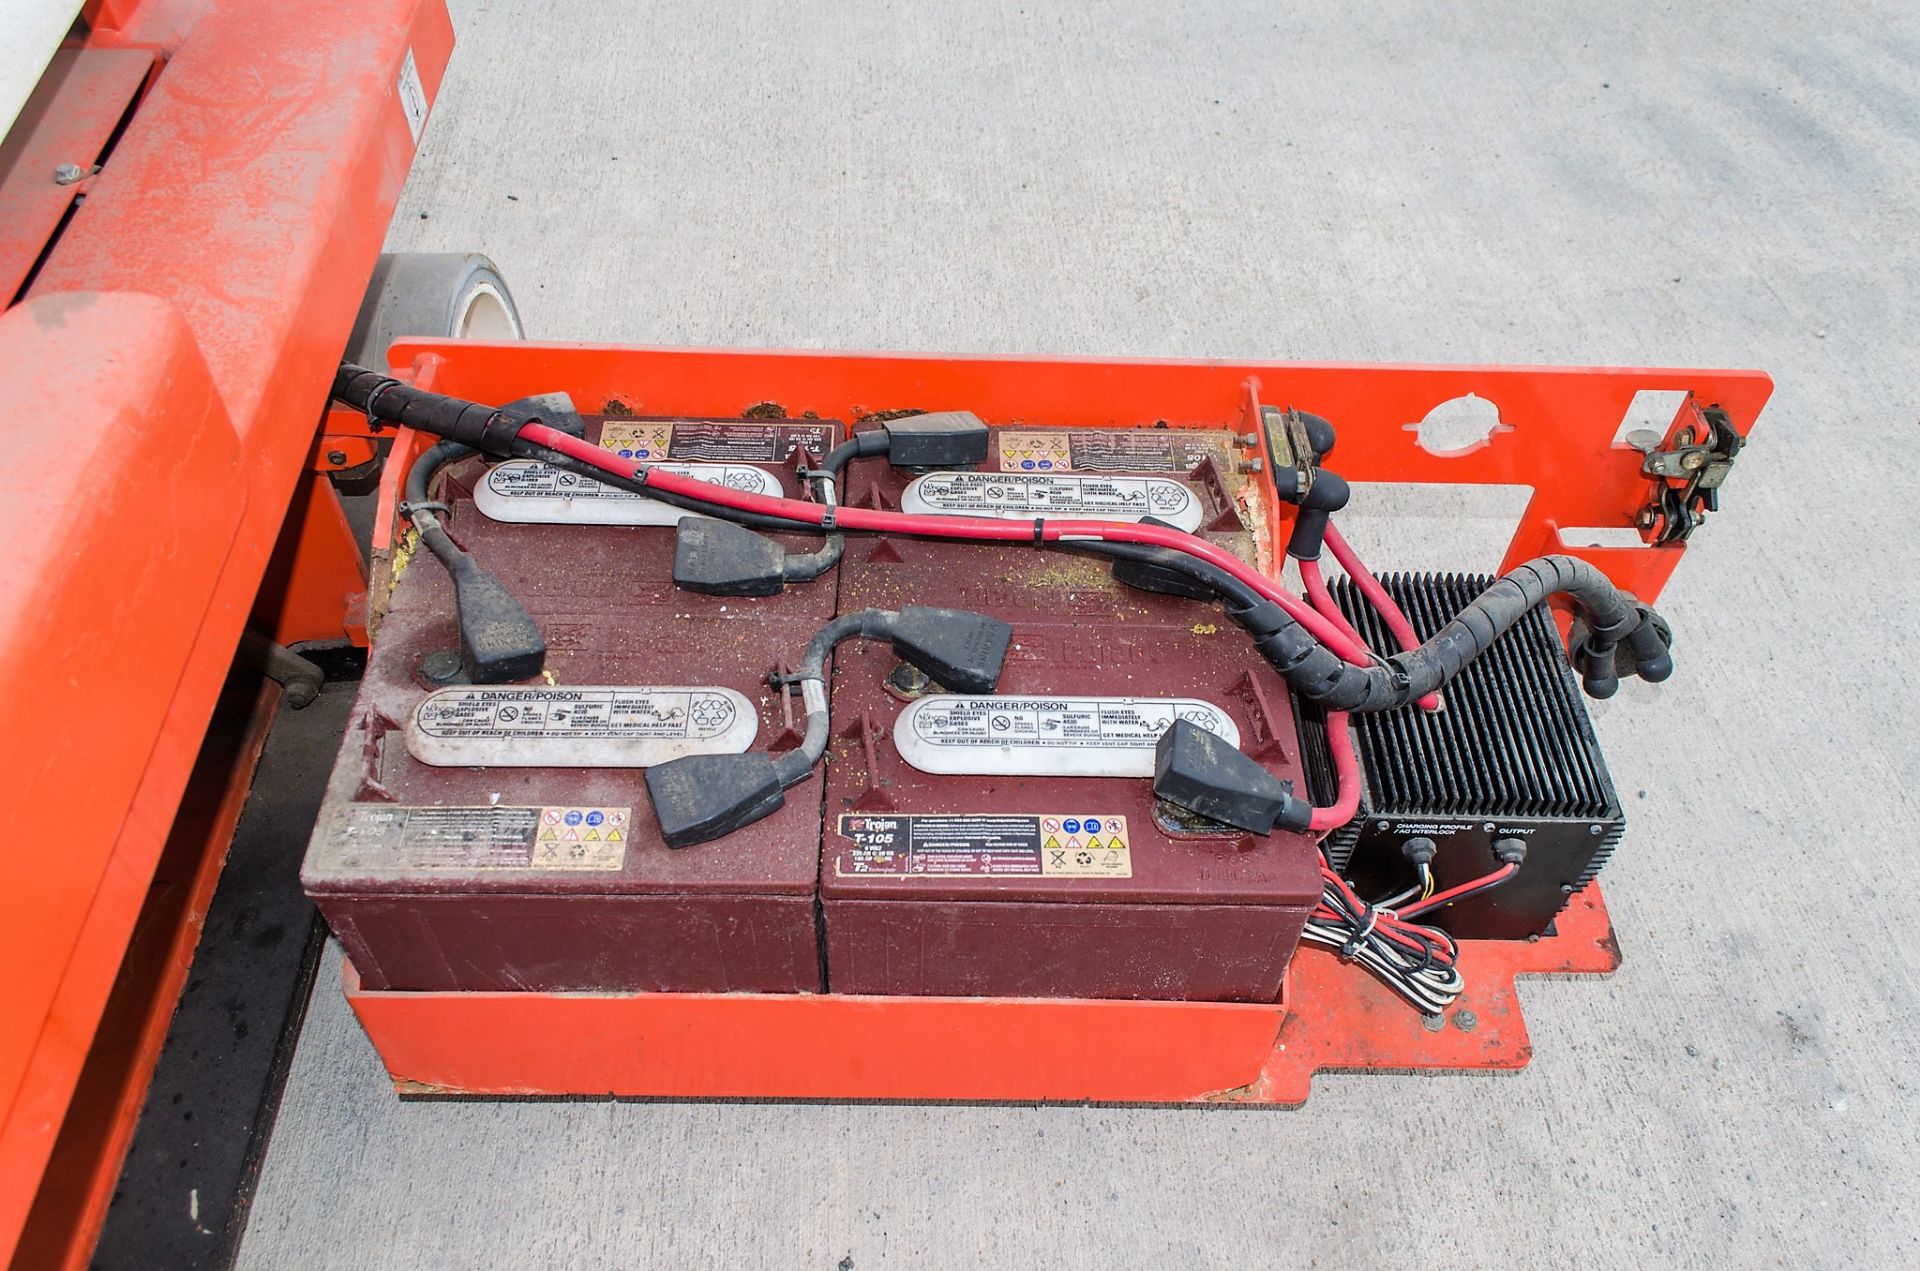 Snorkel S1930E battery electric scissor lift access platform Year: 2012 S/N: 000850 Recorded - Image 8 of 9